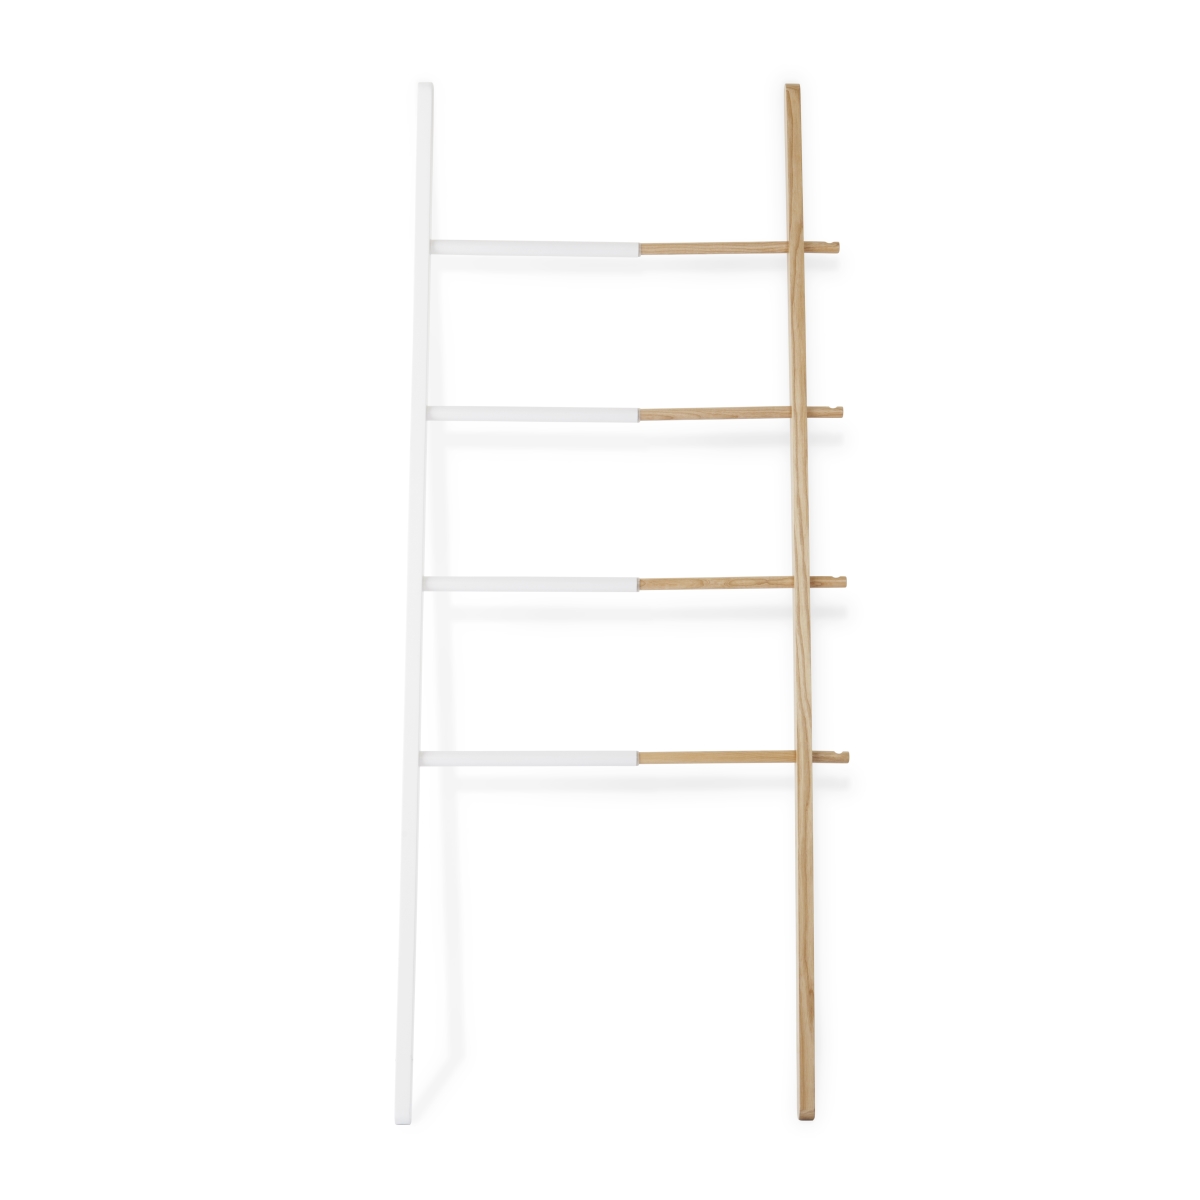 Umbra 320260-668 Hub Ladder Adjustable Clothing Rack for Bedroom Expands From 16 to 24 in. - White & Natural